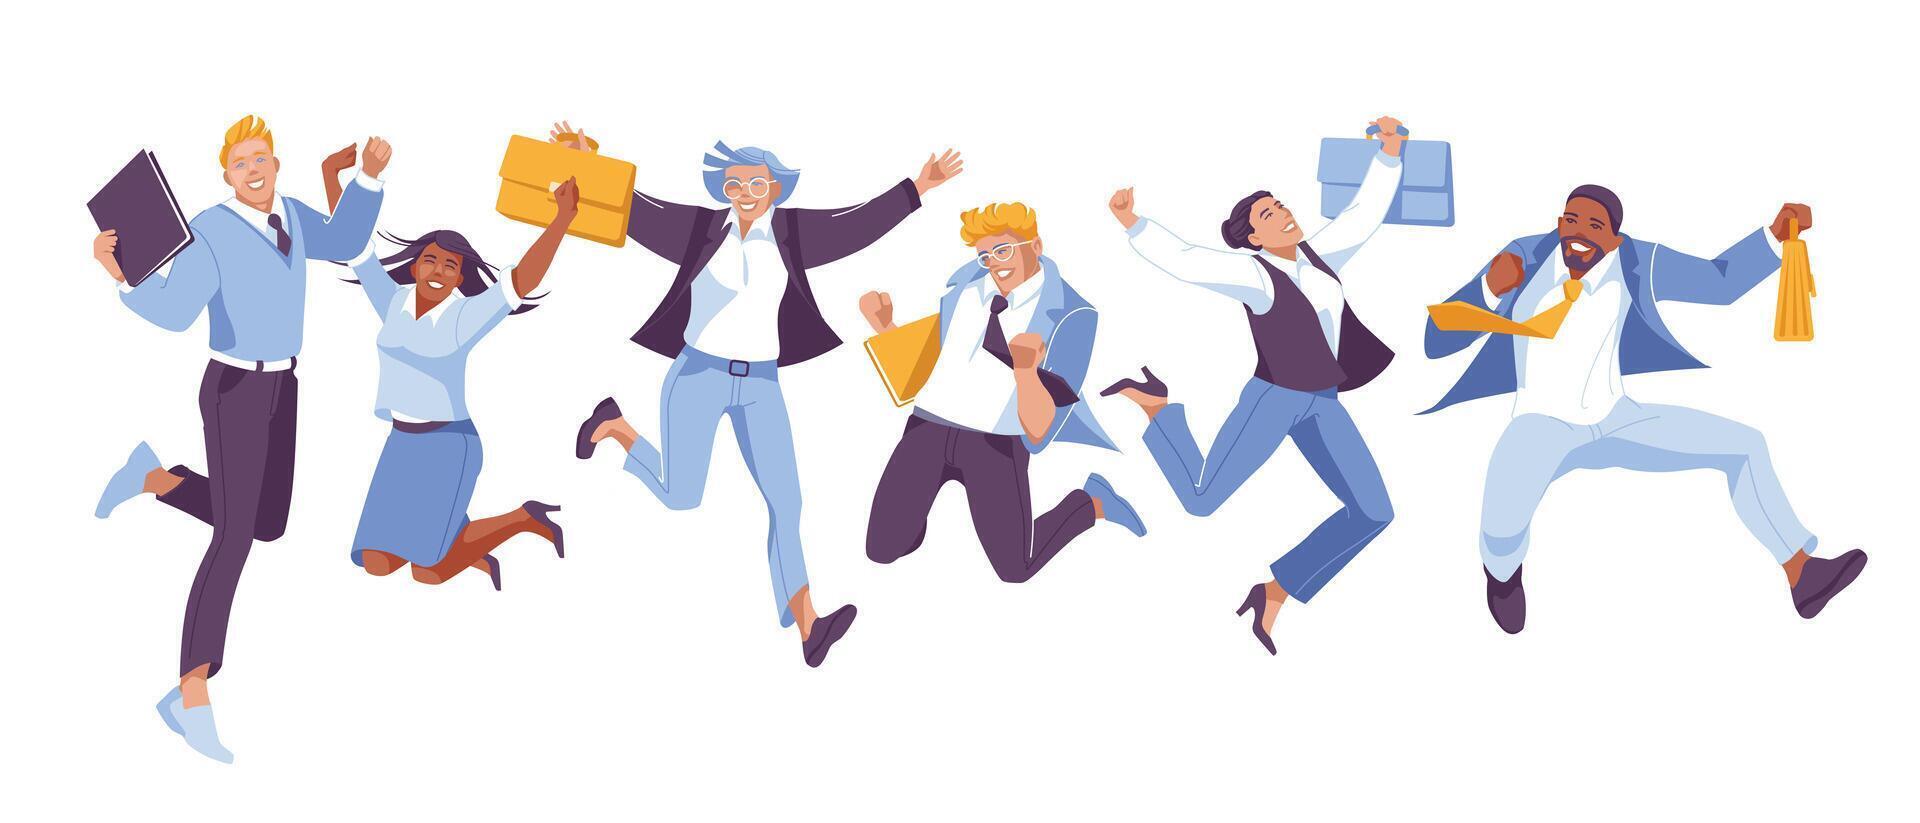 variety of business people jumping together. Teamwork and winning challenges. Isolated on white background. Vector flat illustration